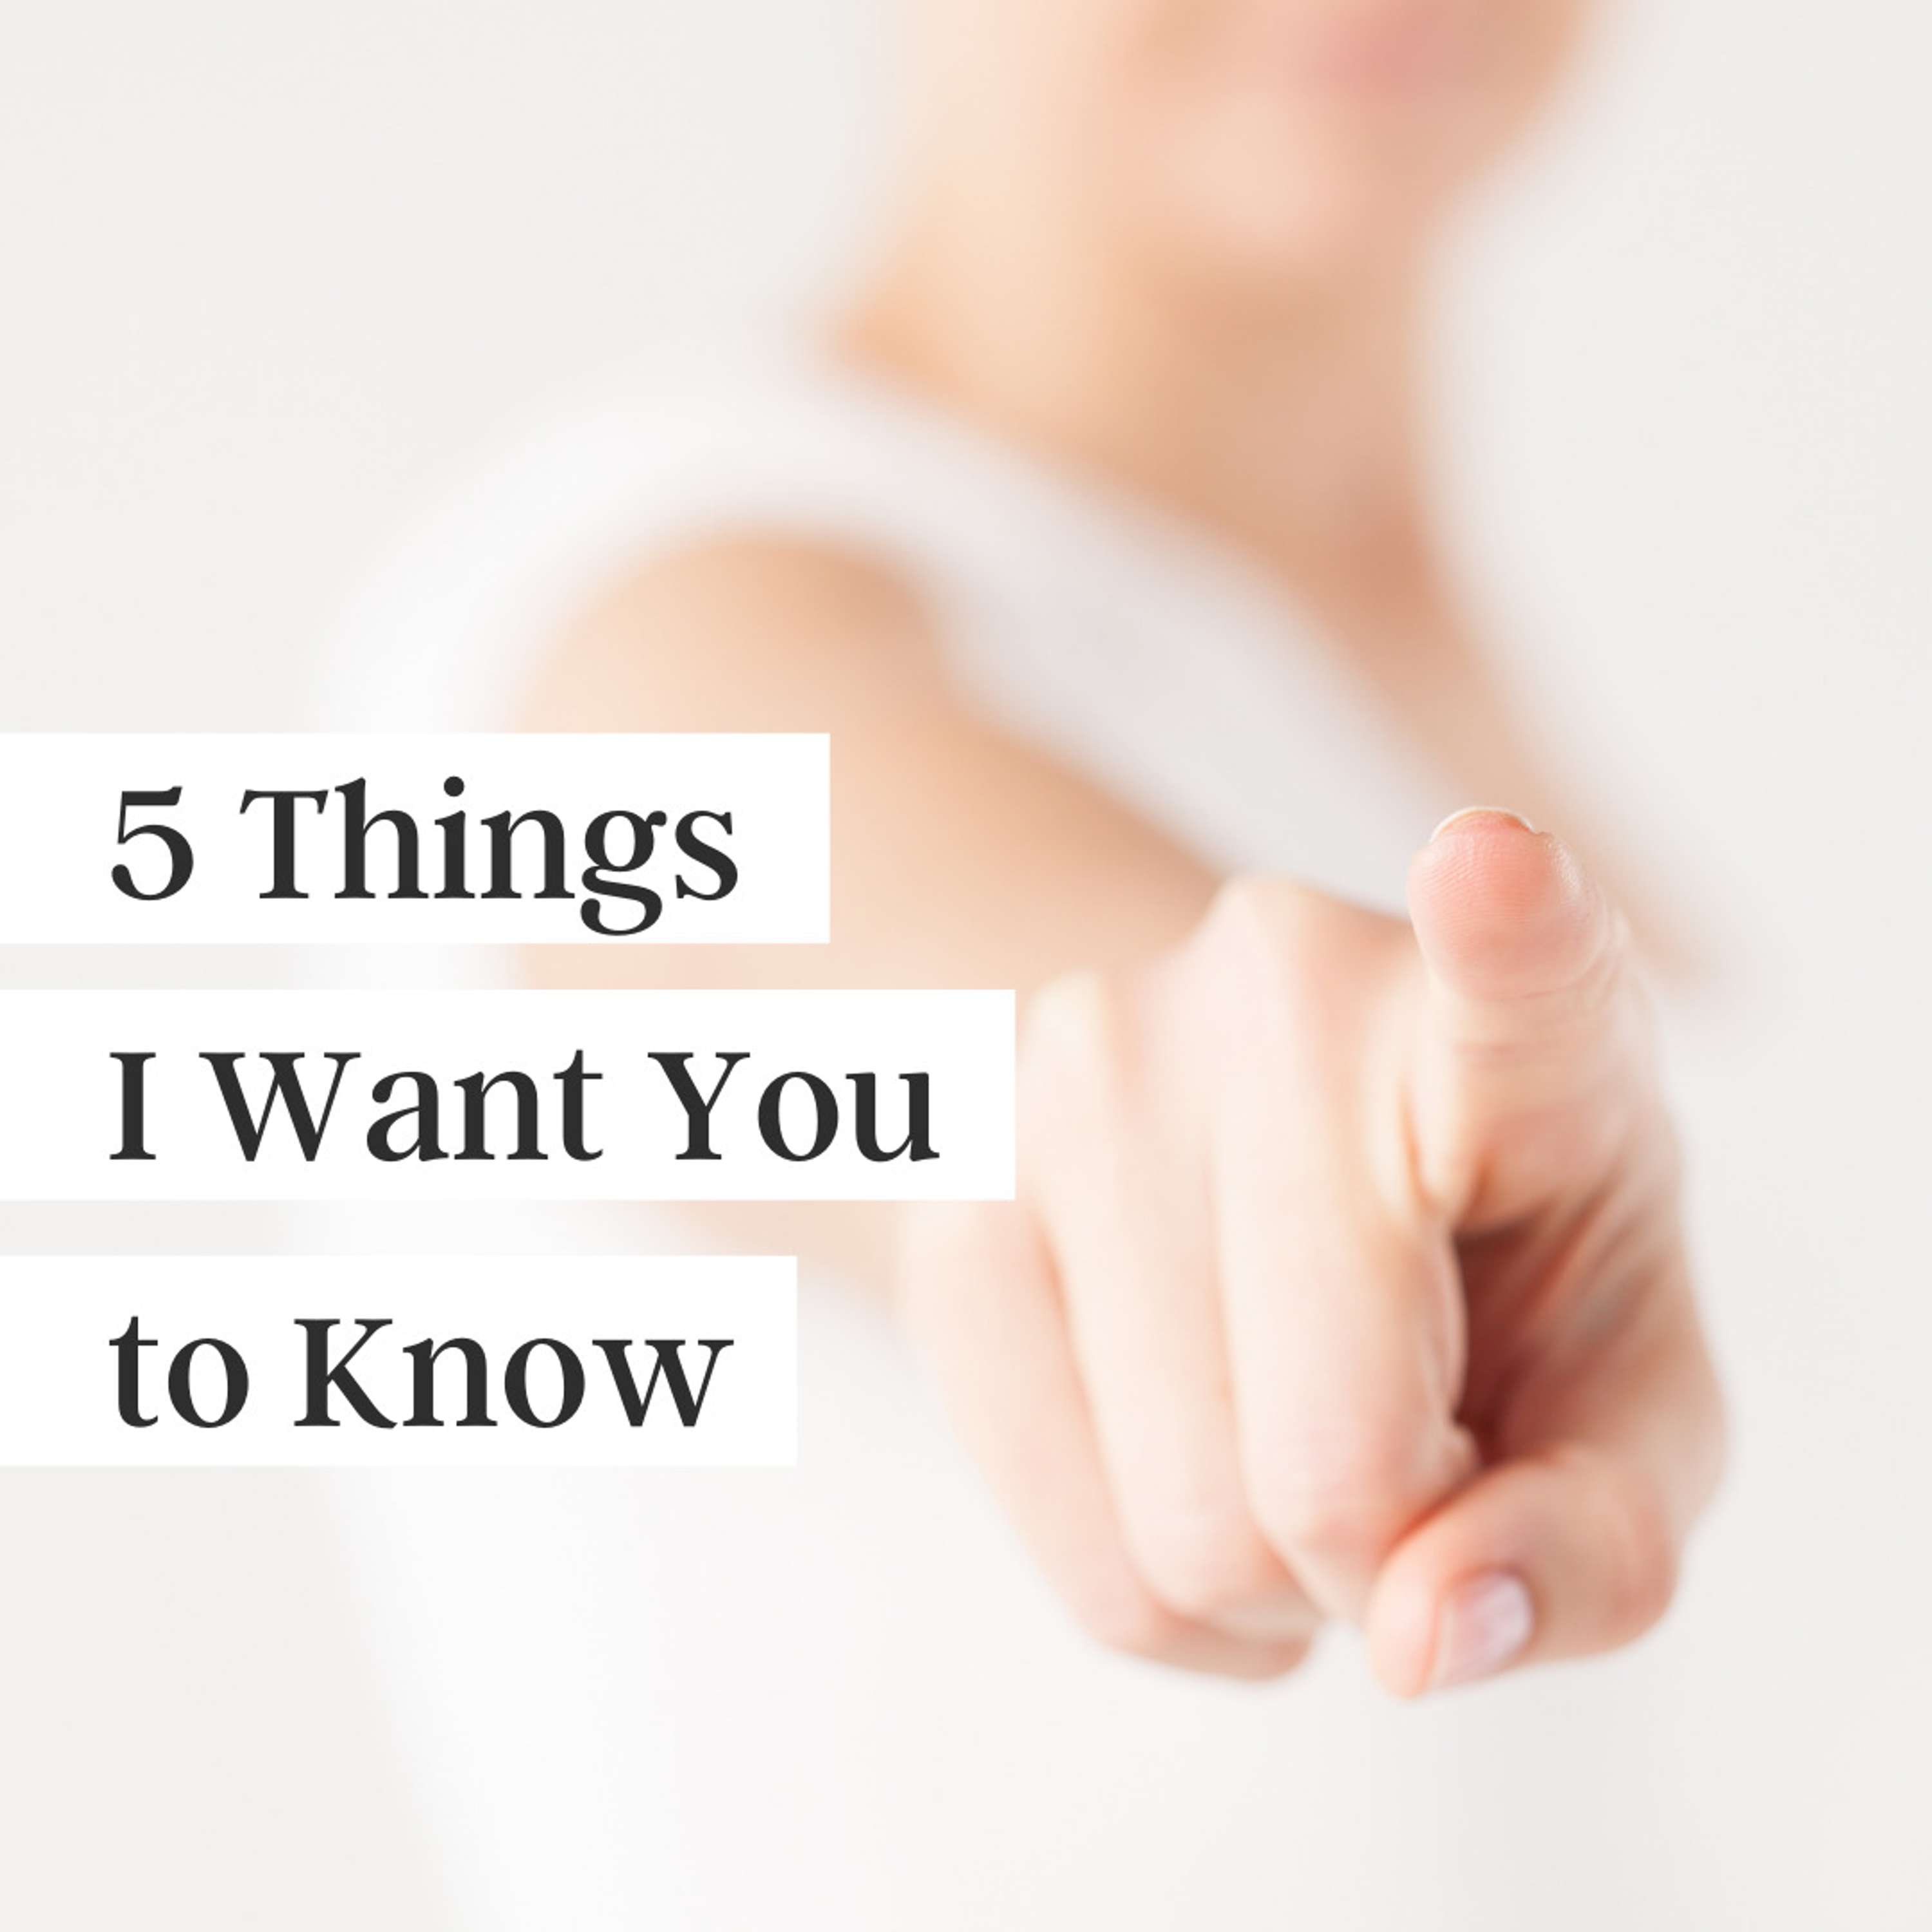 5 Things I Want You to Know About Yourself